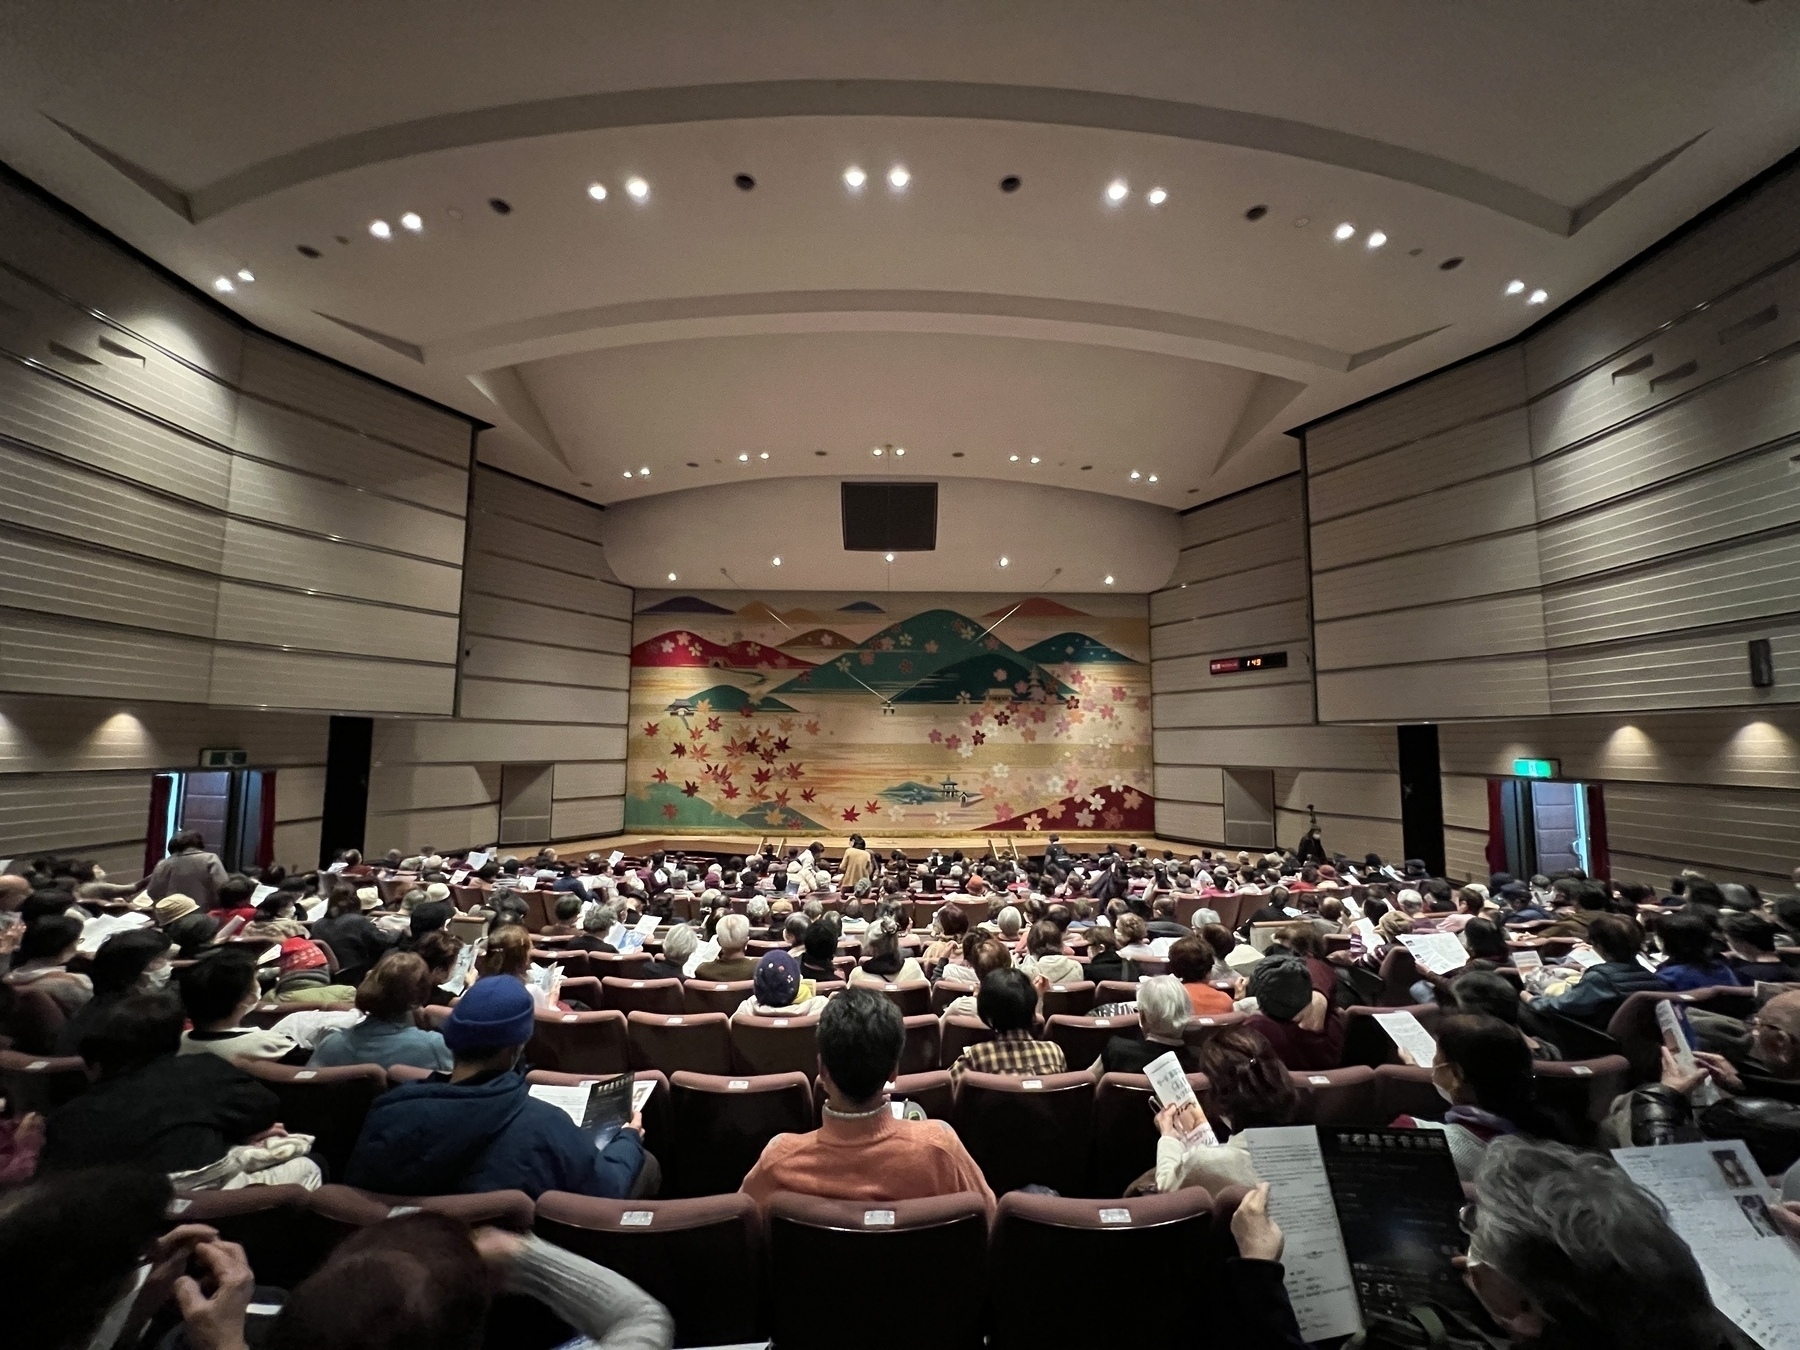 Theatre from the back. The brocade curtain displaying Biwako scenery is down and people are seated waiting. 